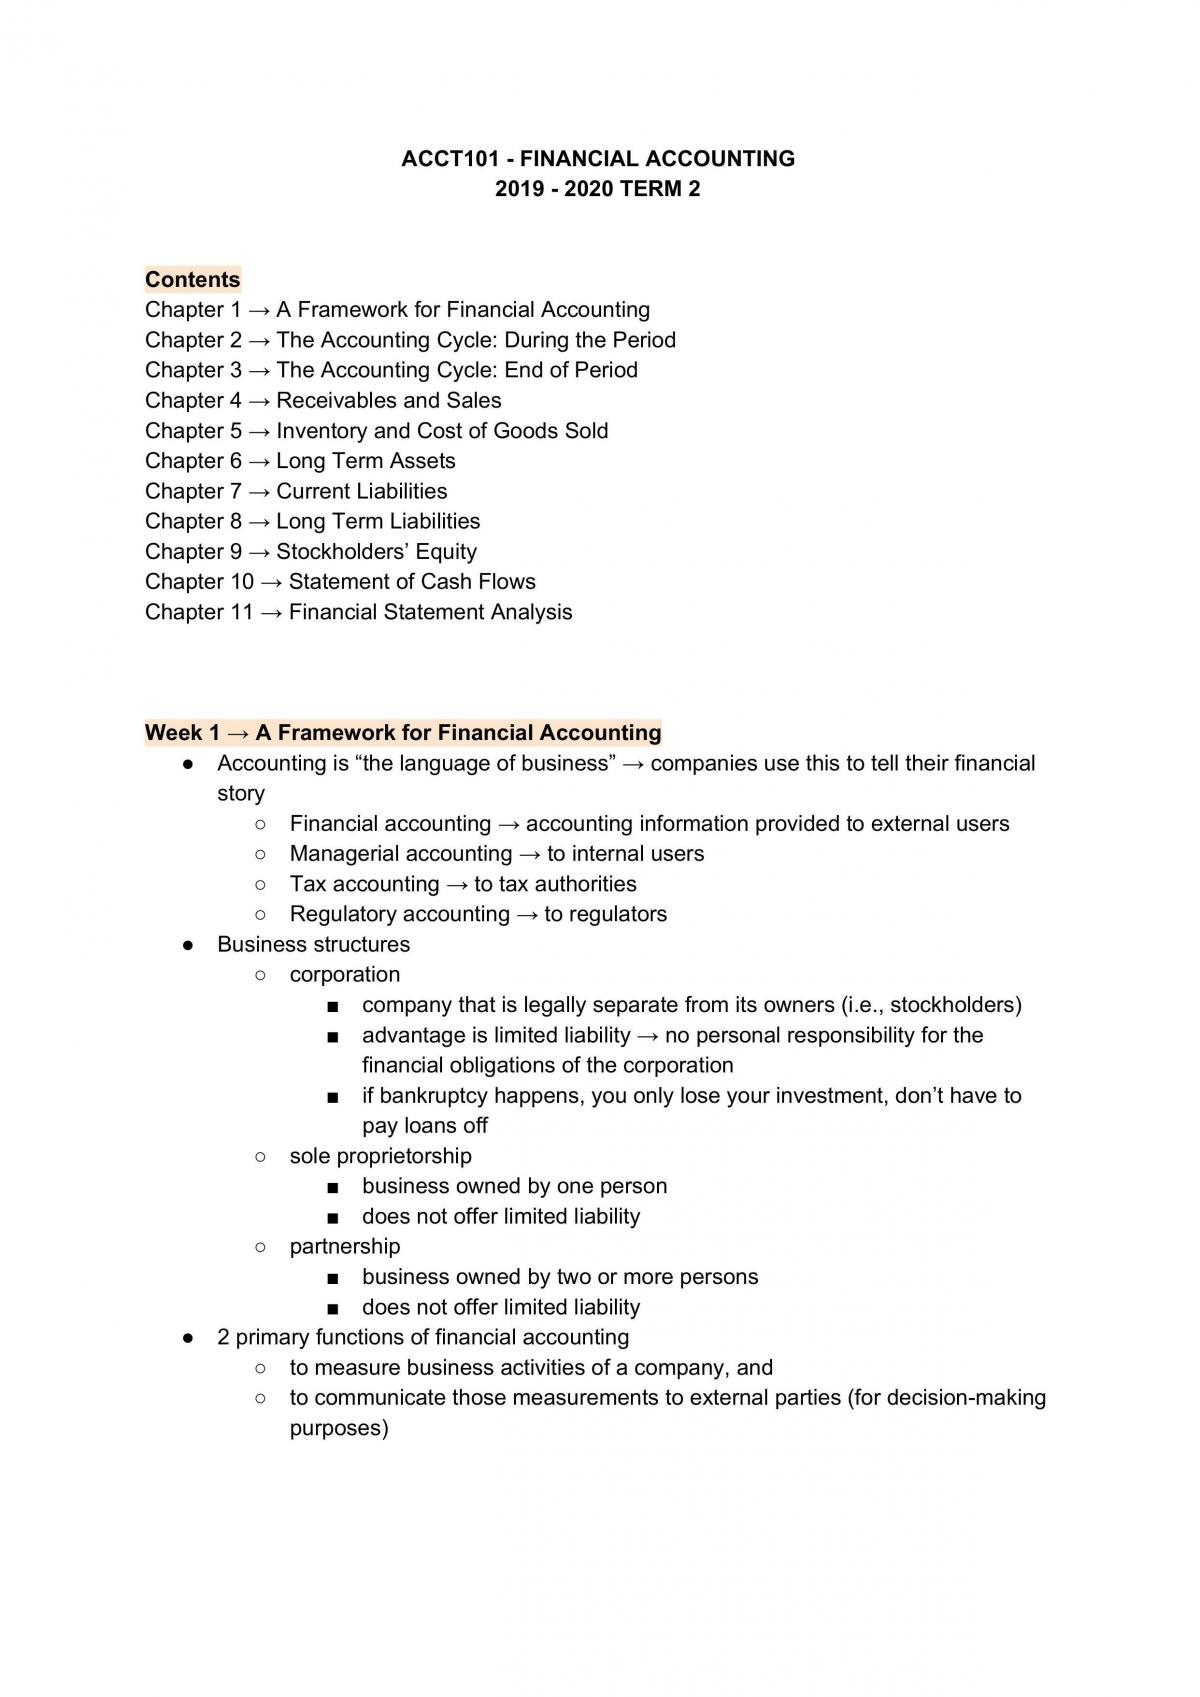 ACCT101 - Financial Accounting - Full Notes - Page 1